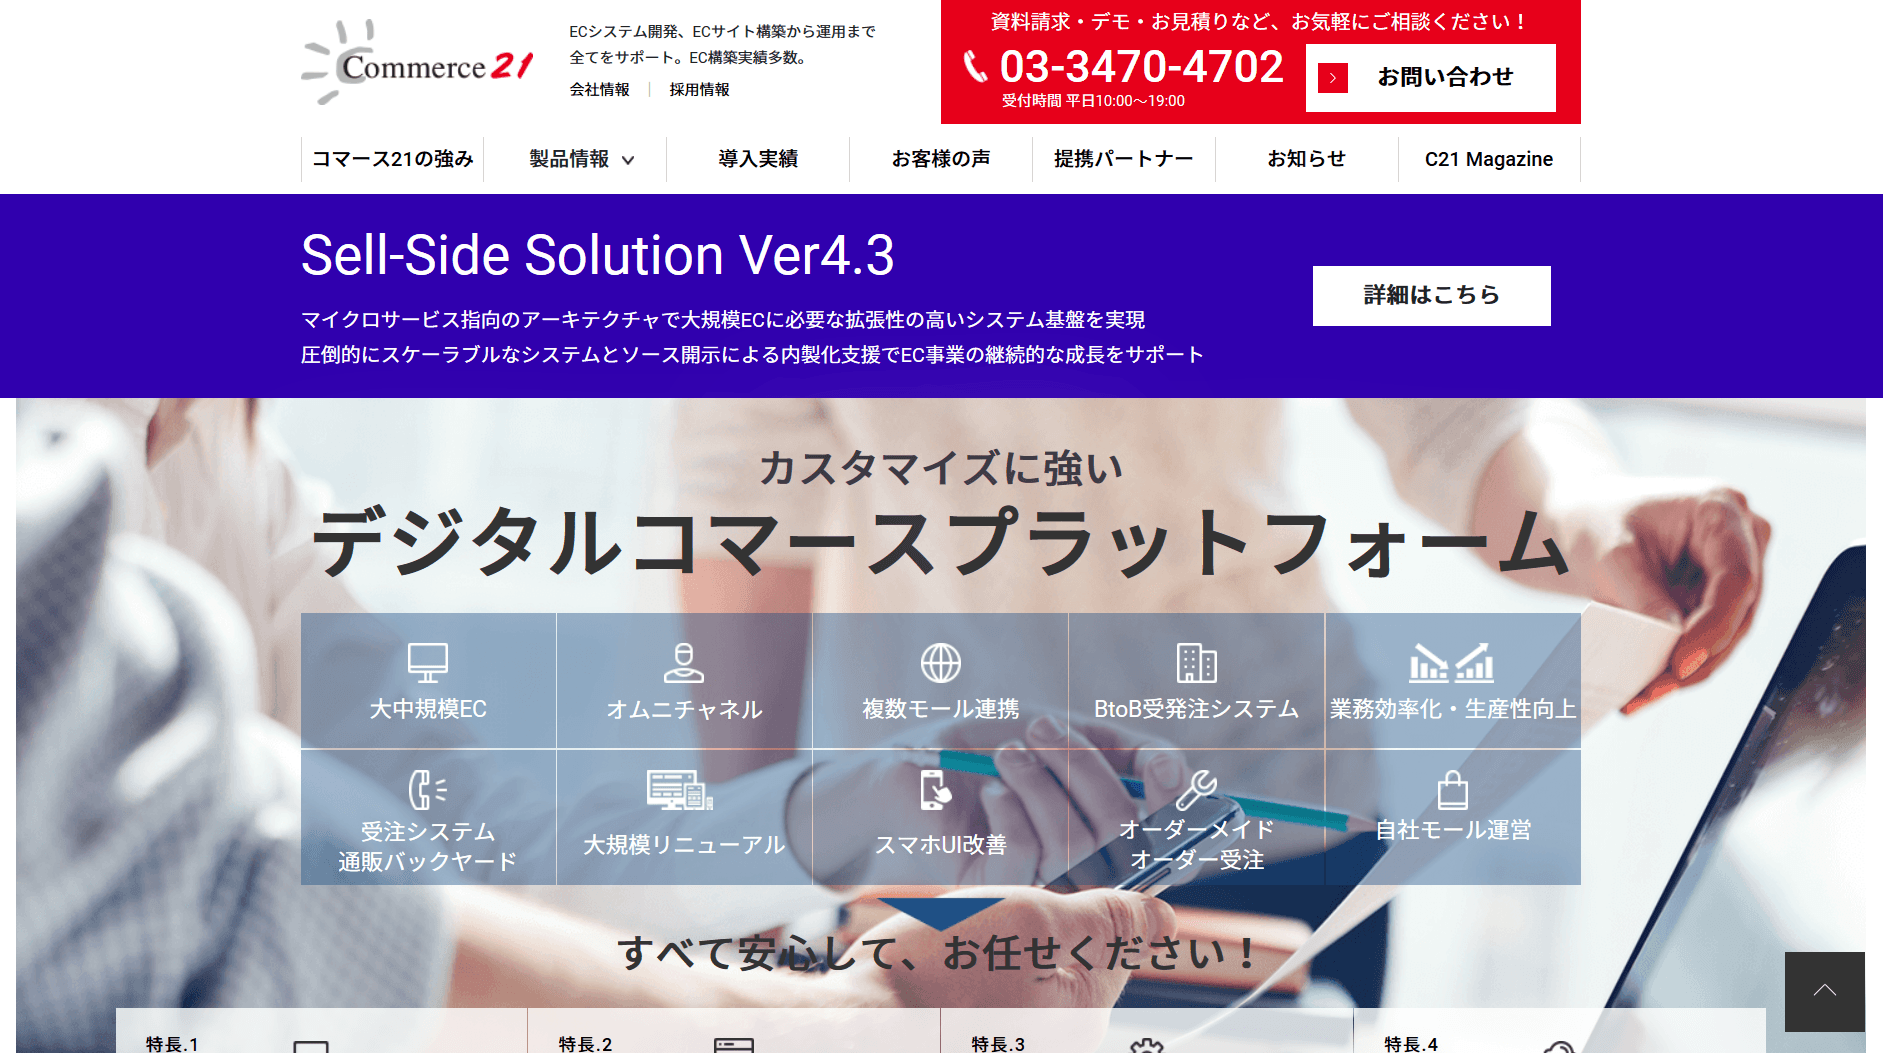 Sell-Side Solution